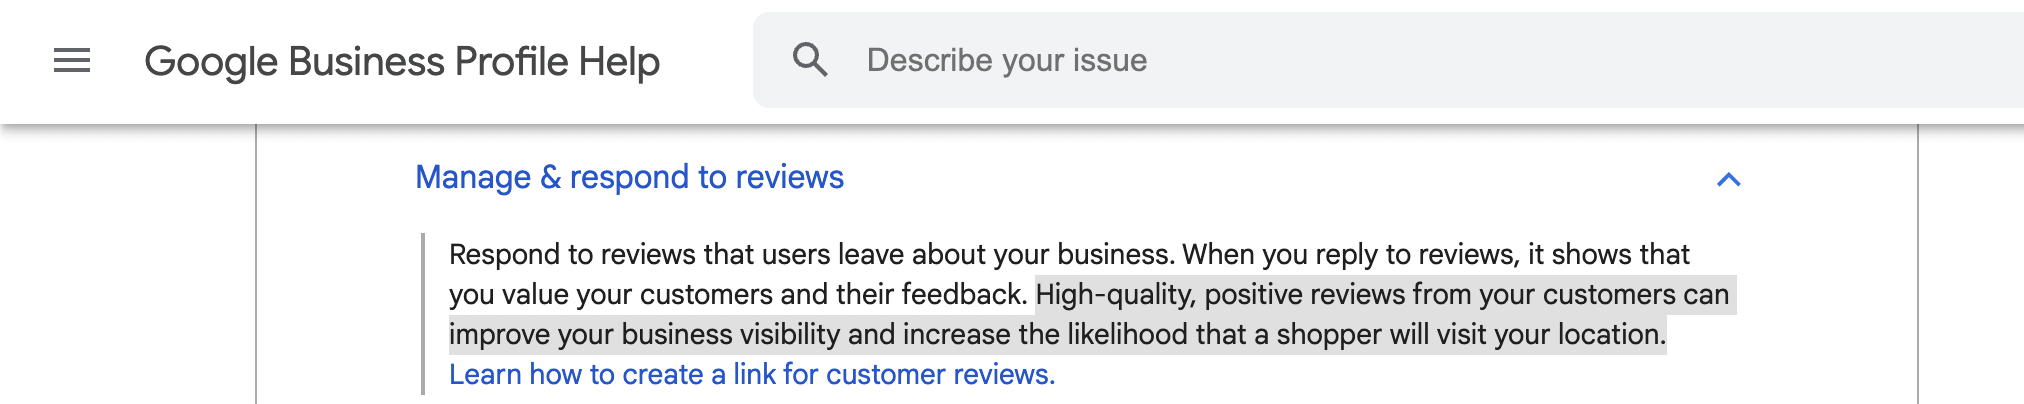 Responding to reviews is important.